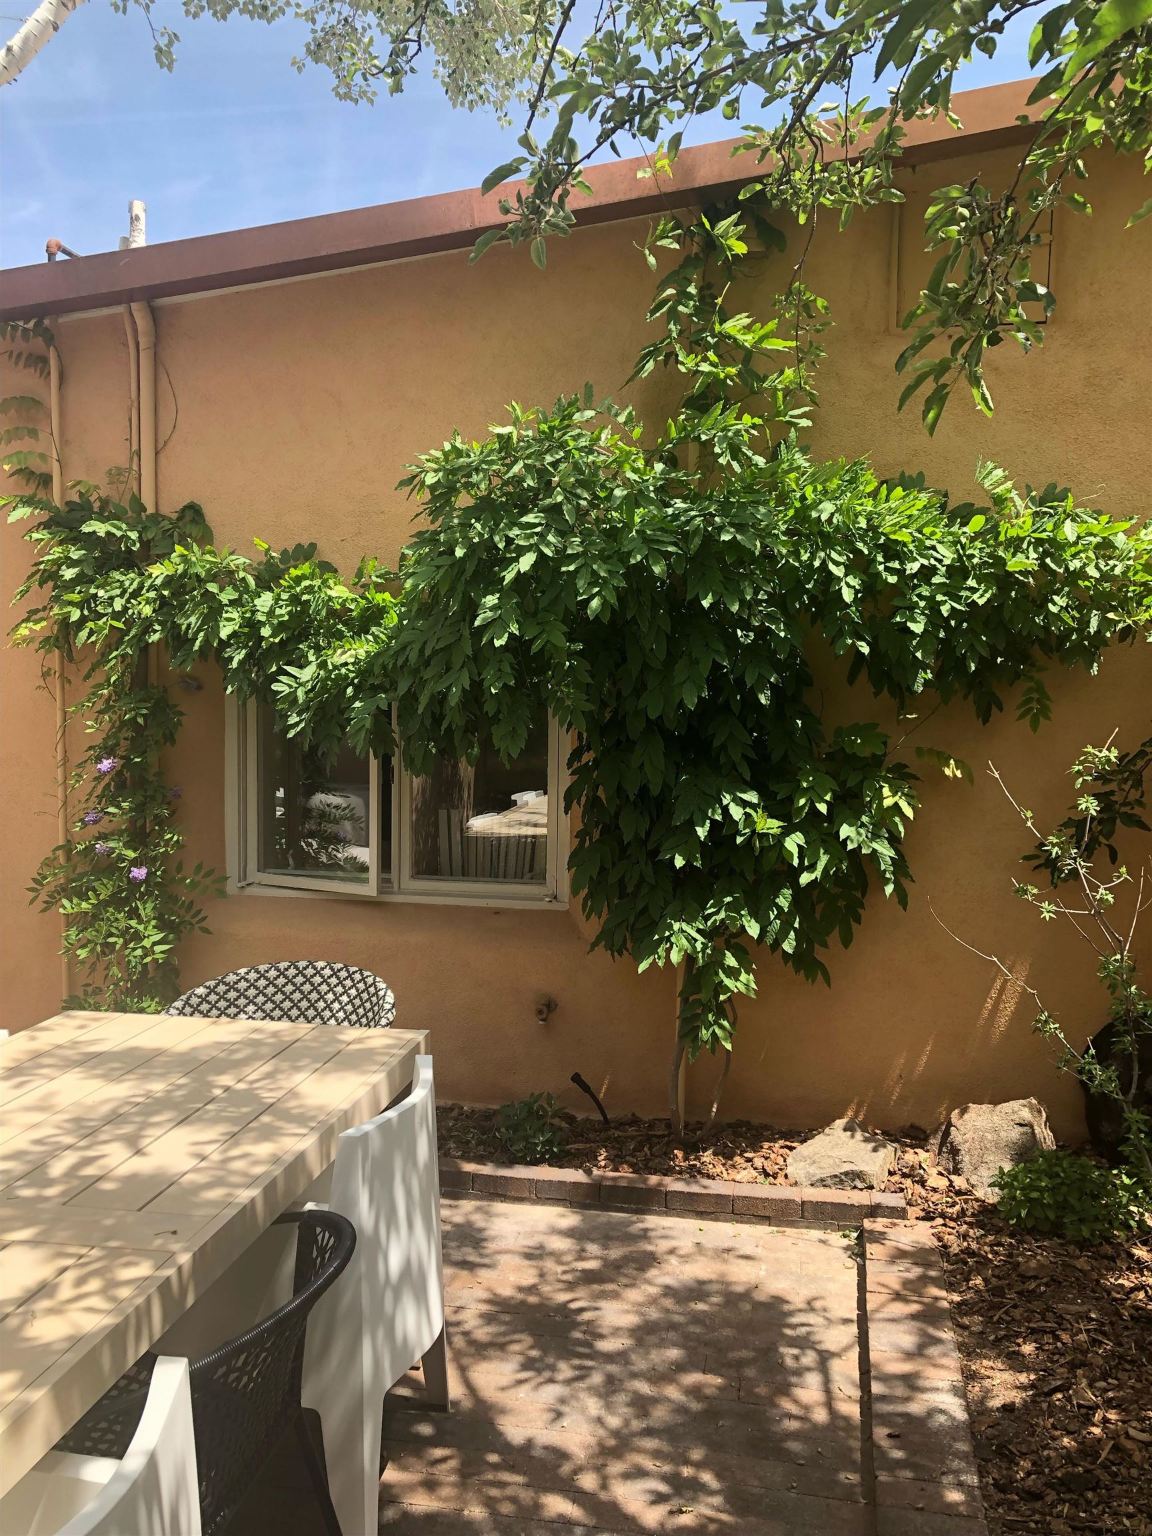 644 CANYON #3, Santa Fe, New Mexico 87501, 1 Bedroom Bedrooms, ,1 BathroomBathrooms,Residential,For Sale,644 CANYON #3,202201453